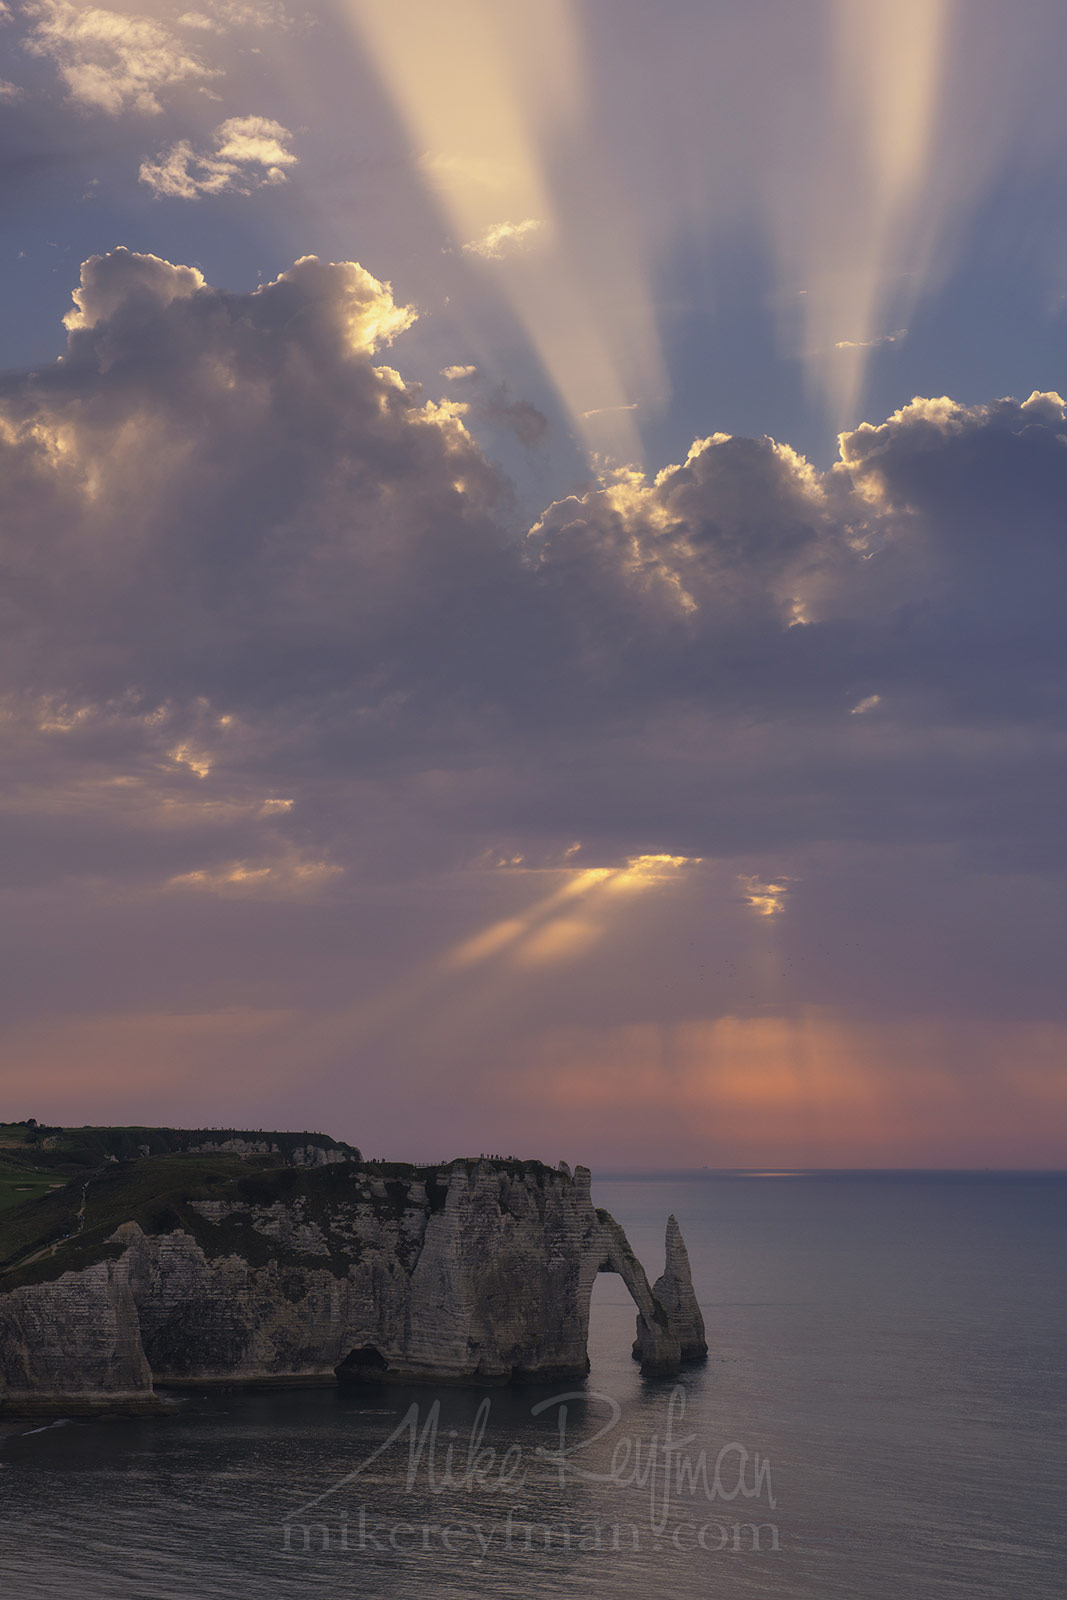 Arch Porte d'Aval and L'Aiguille - the Needle at sunset. Cote d'Albatre – The Alabaster Coast. Ertretat, Normandy, France ET1-MR50A0305 - White Chalk Cliffs and Arches of Alabaster Coast. Etretat, Upper Normandy, France - Mike Reyfman Photography